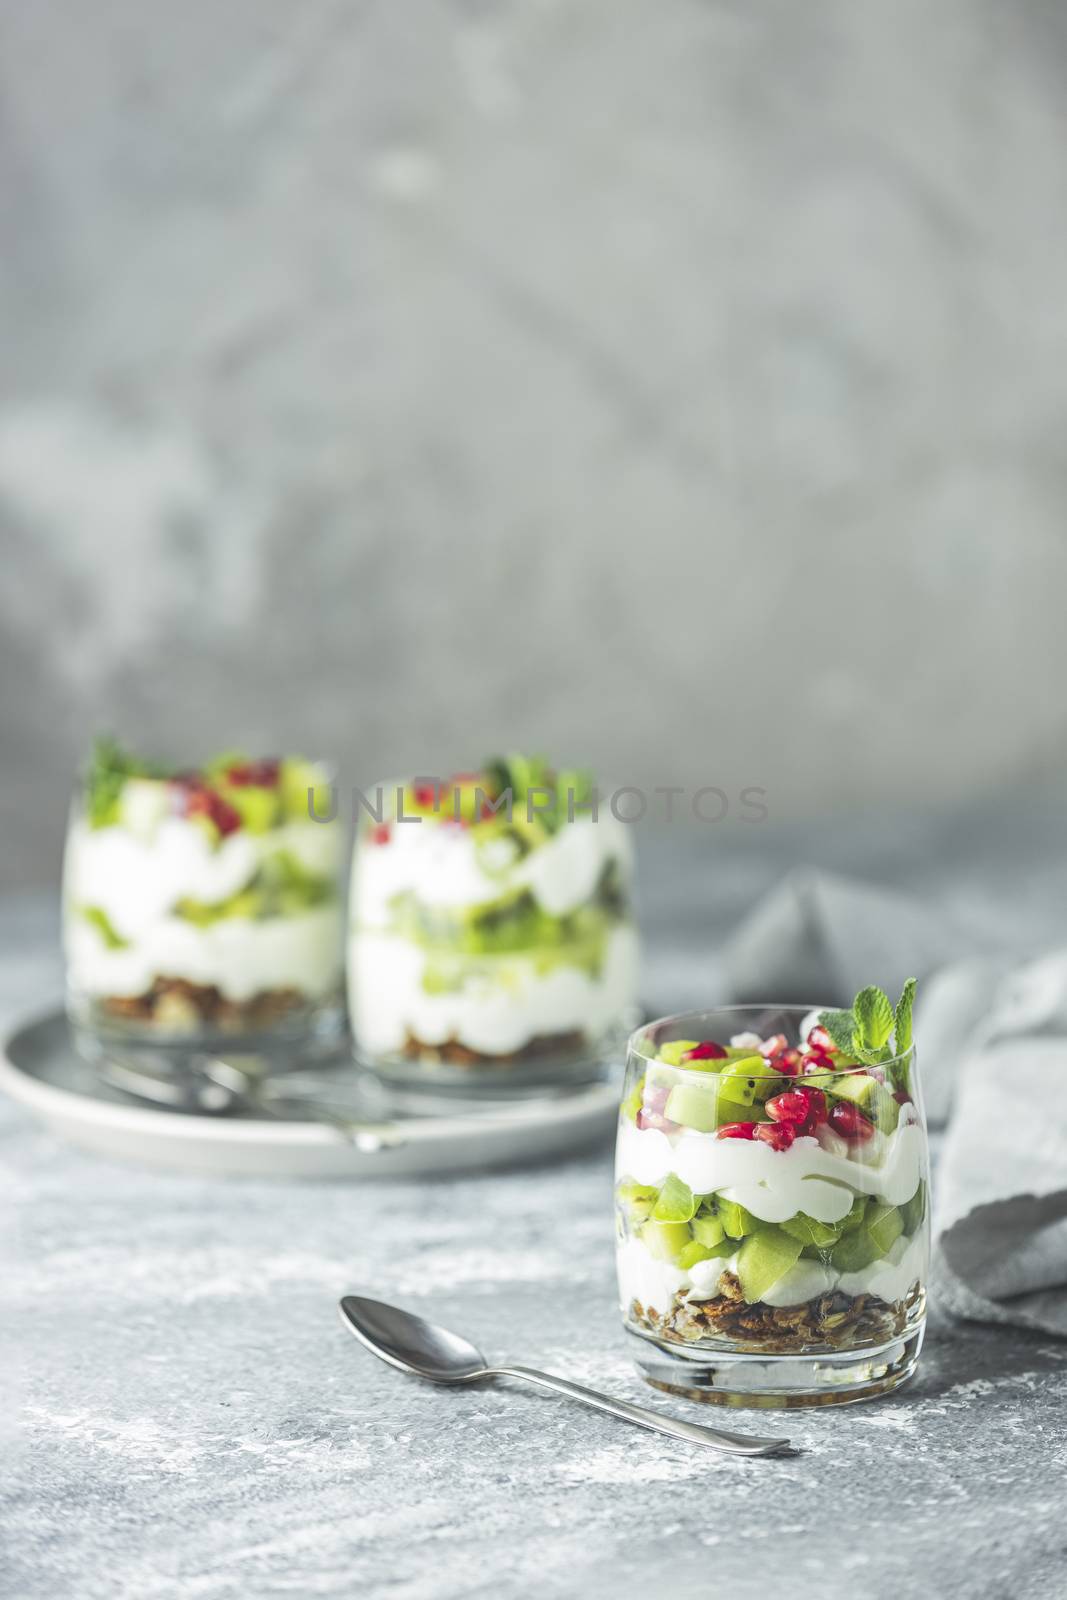 Kiwi parfait dessert in glass with ingredients. Yogurt, granola and fruits. Healthy snack or breakfast. Light gray concrete surface.